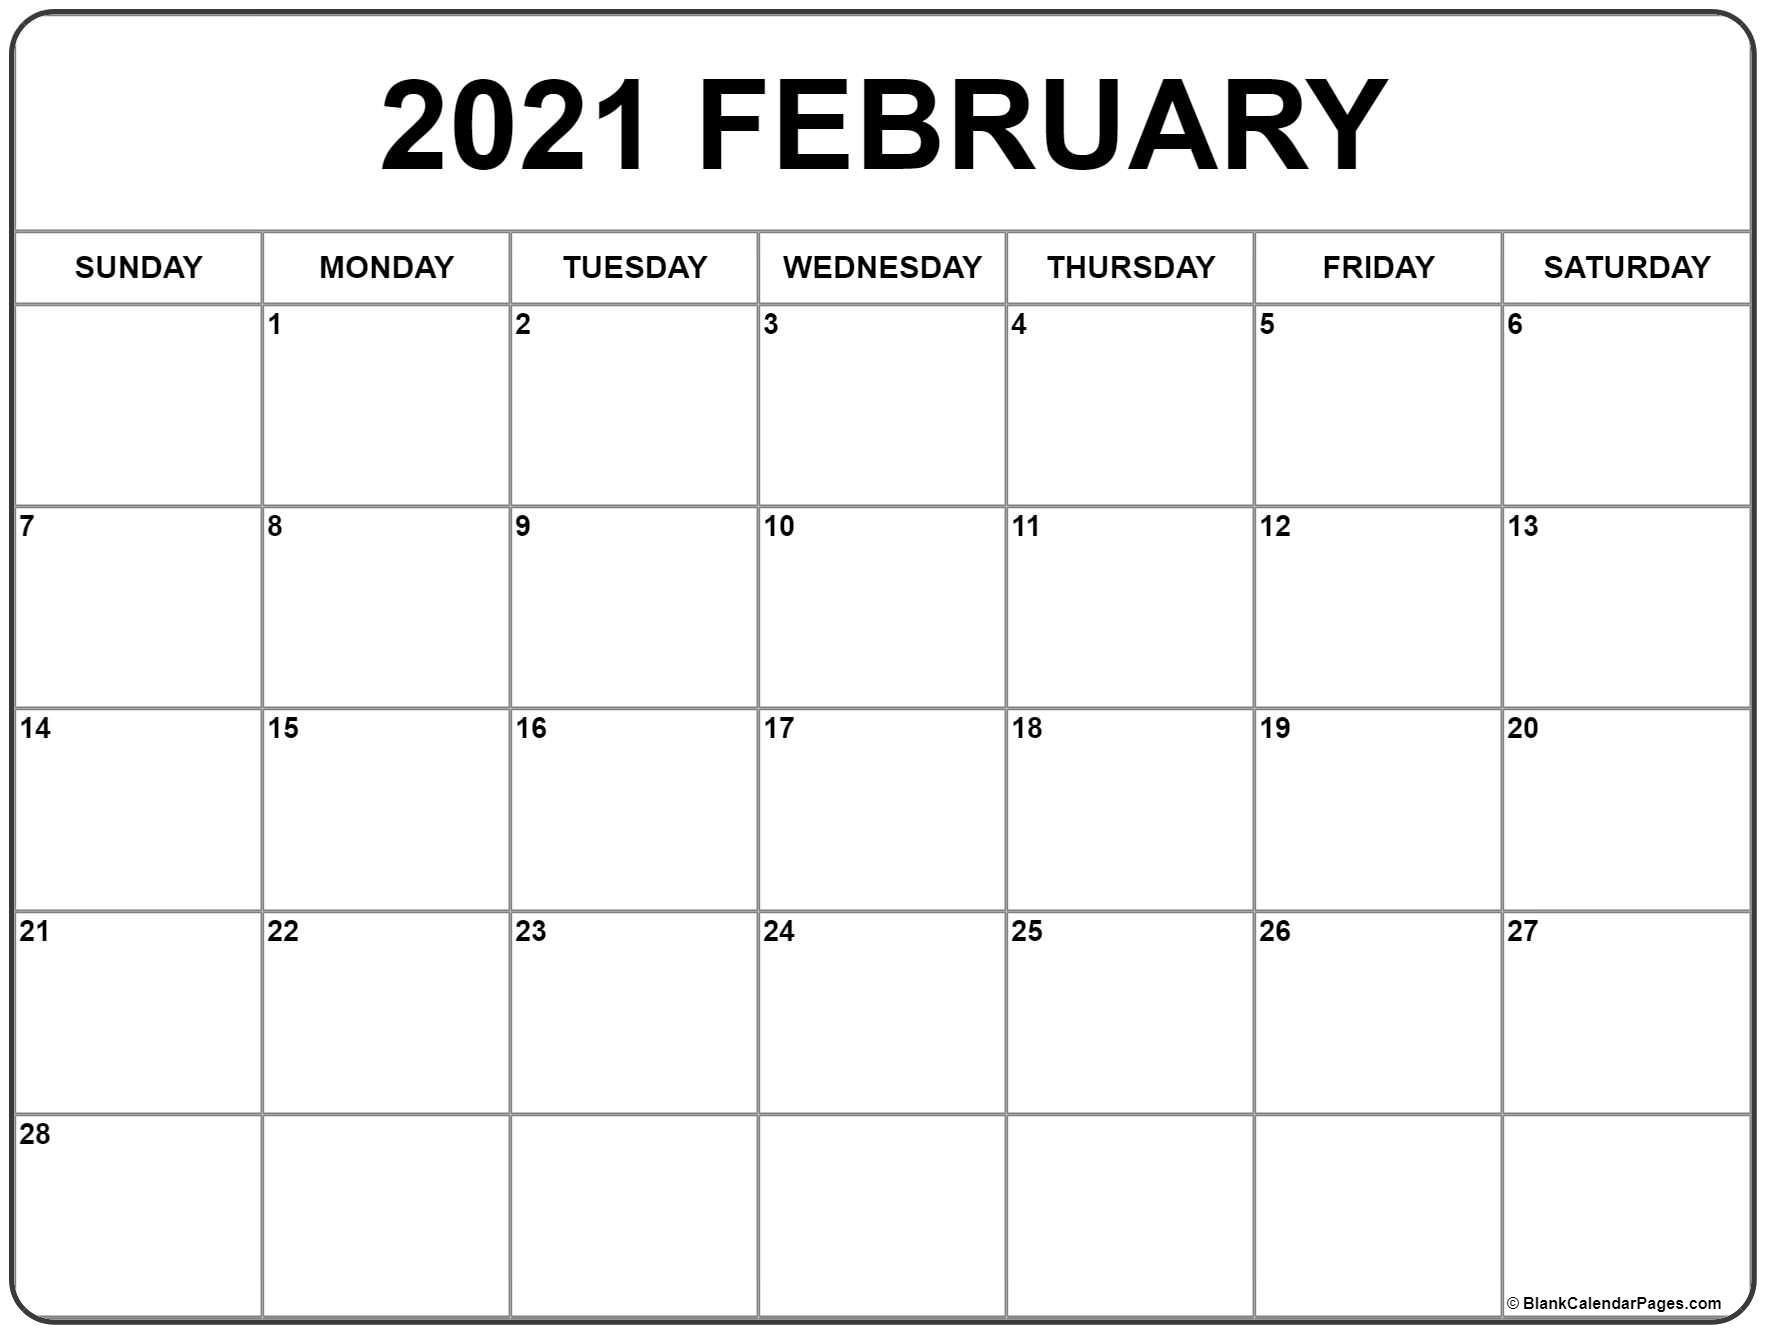 February 2021 Calendar | Free Printable Monthly Calendars-Fill In 2021 Calendar Pages Blank